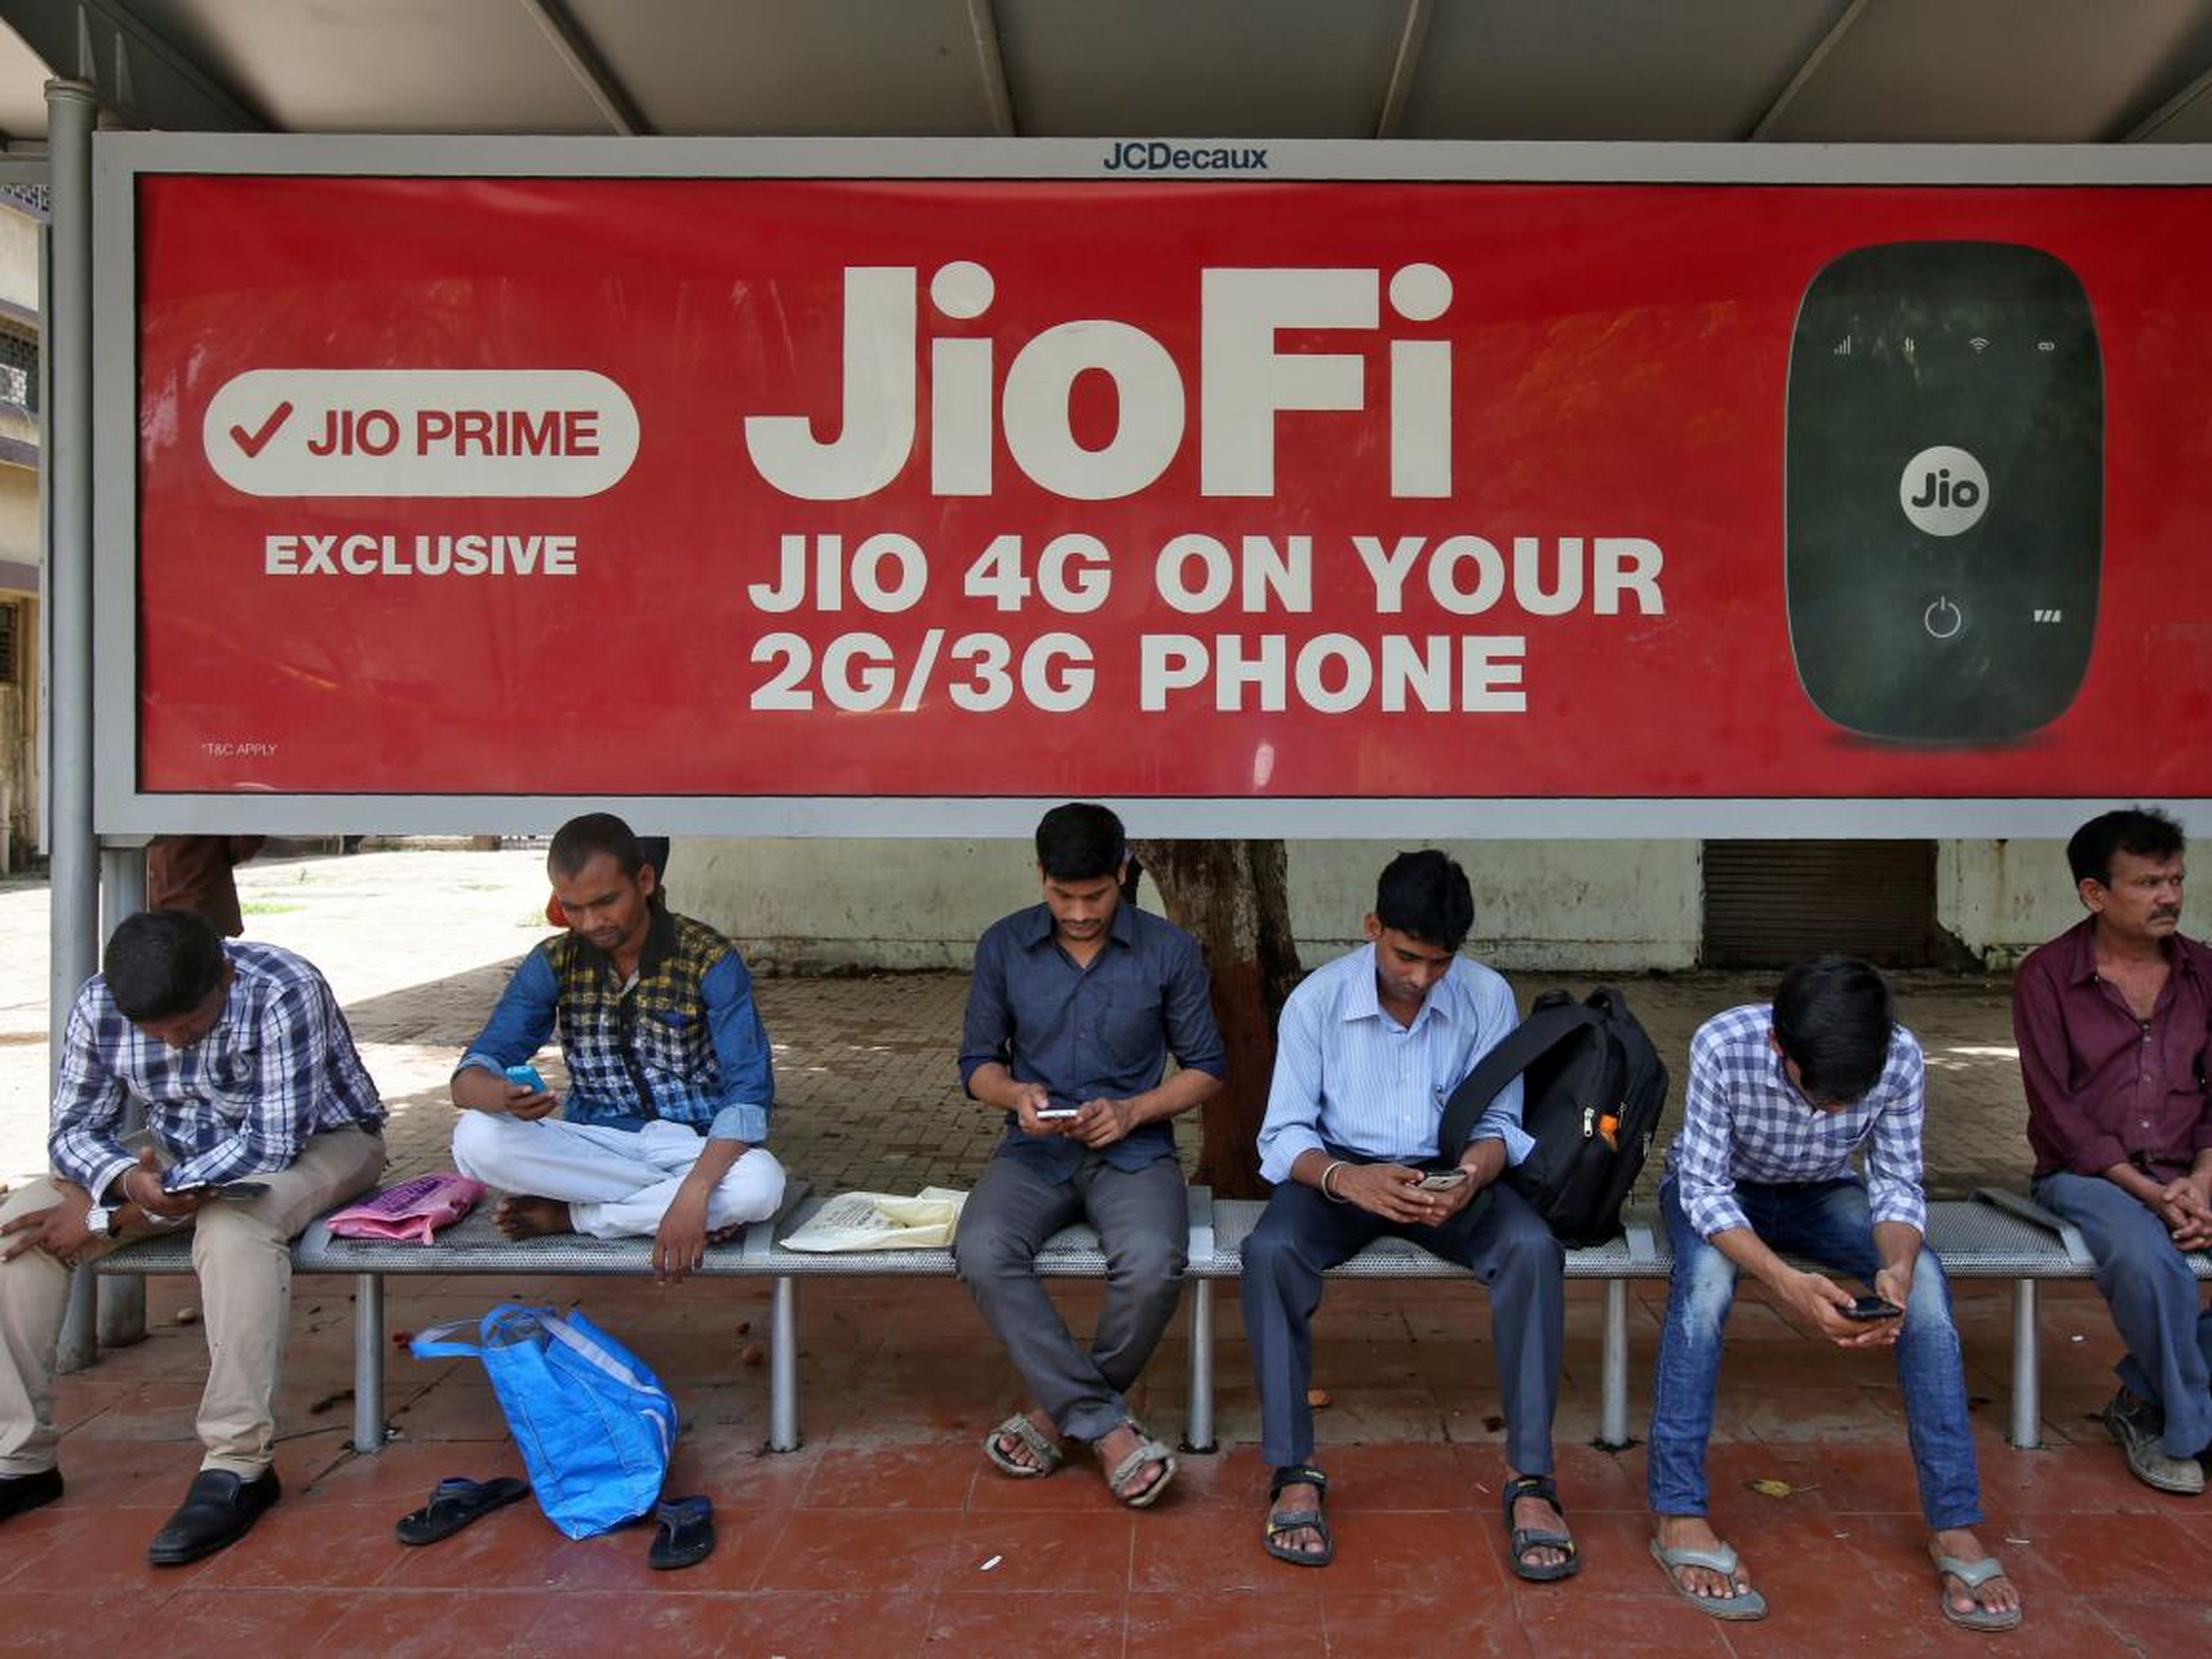 Ambani's telecom company, Jio, has grown to become one of India's biggest mobile carriers, with 340 million subscribers.